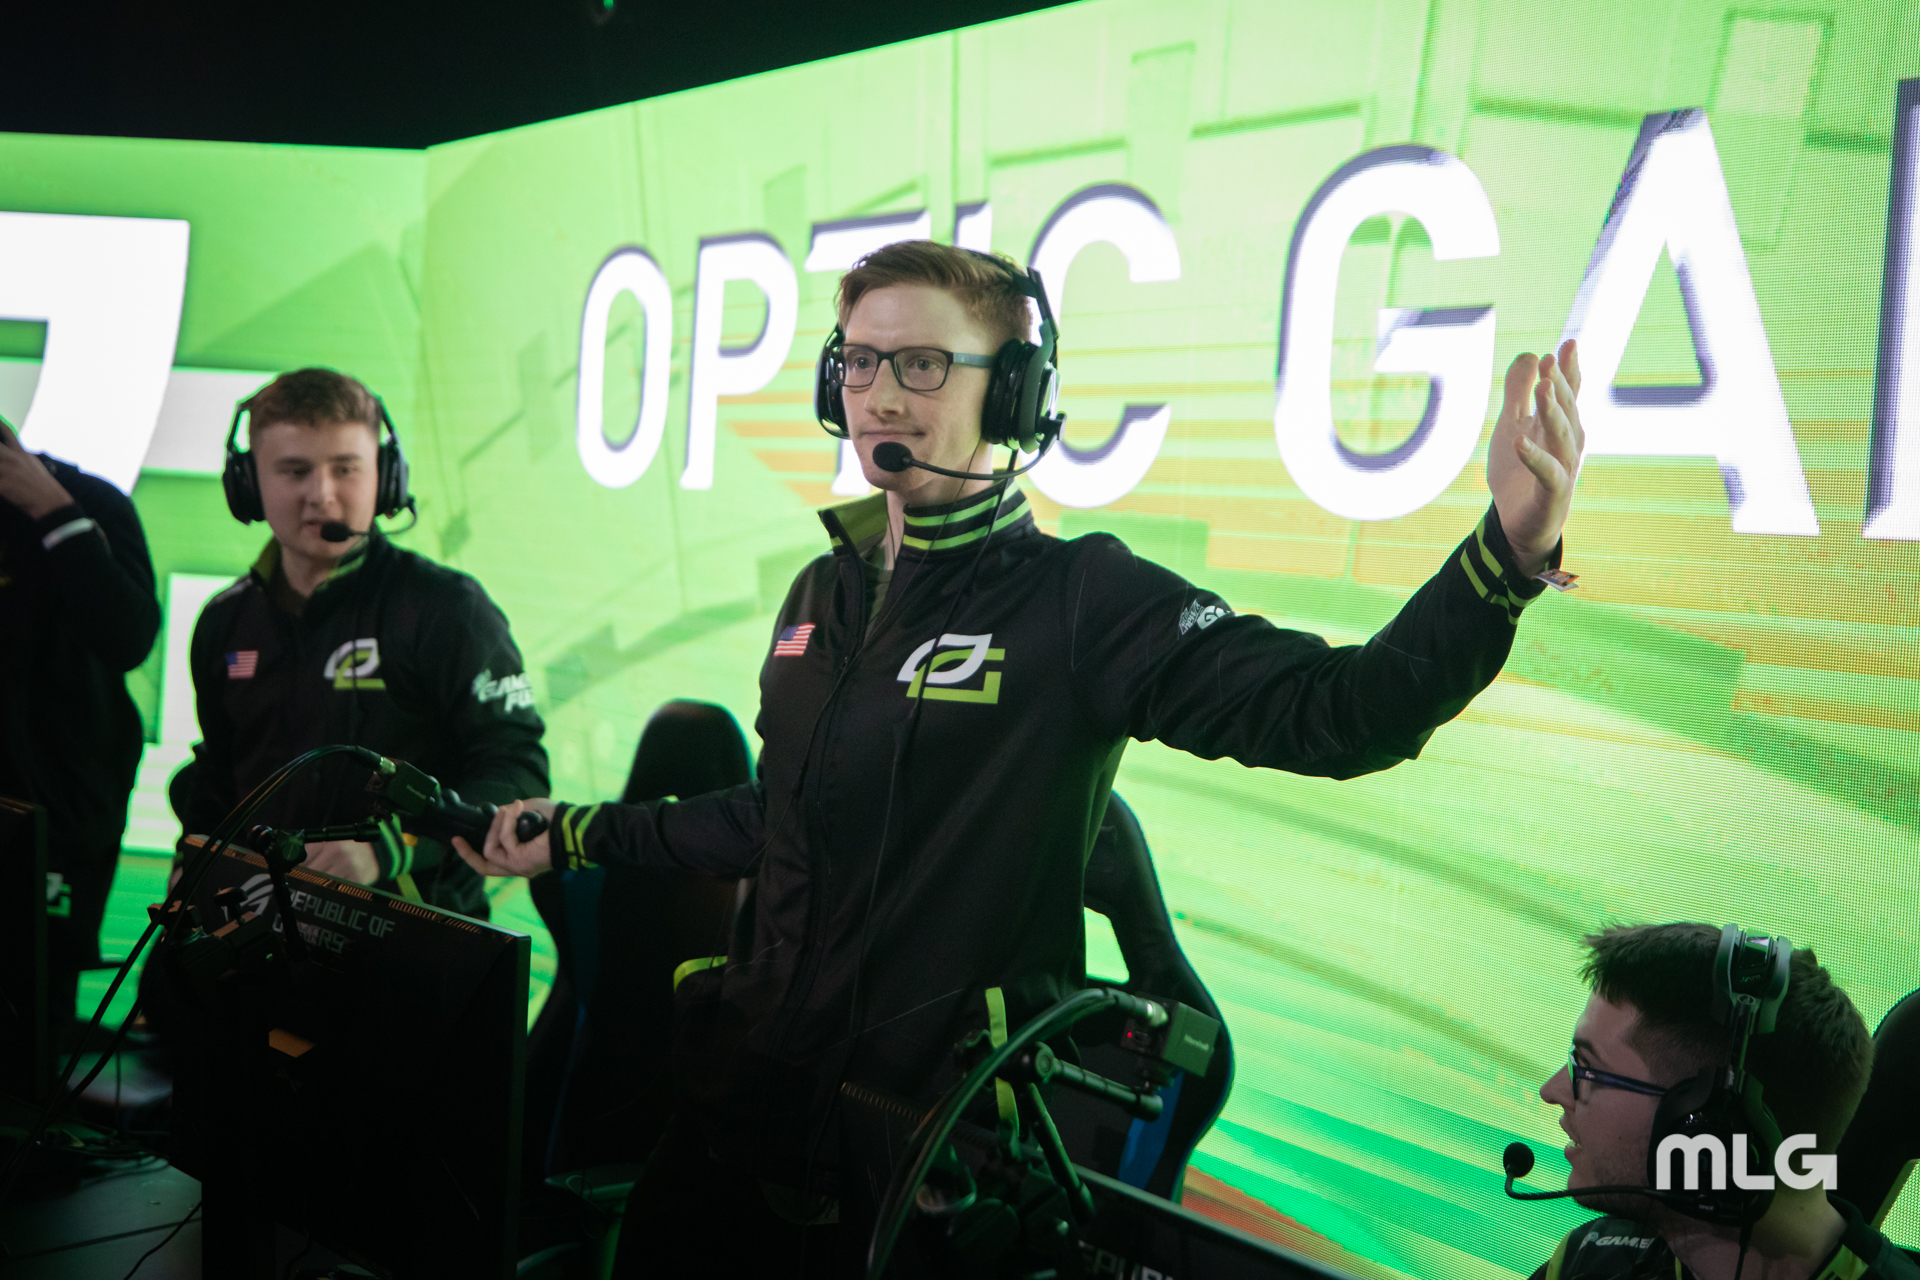 OpTic Gaming, eUnited, and Team Envy set to face off in Pool D at CWL Fort Worth...